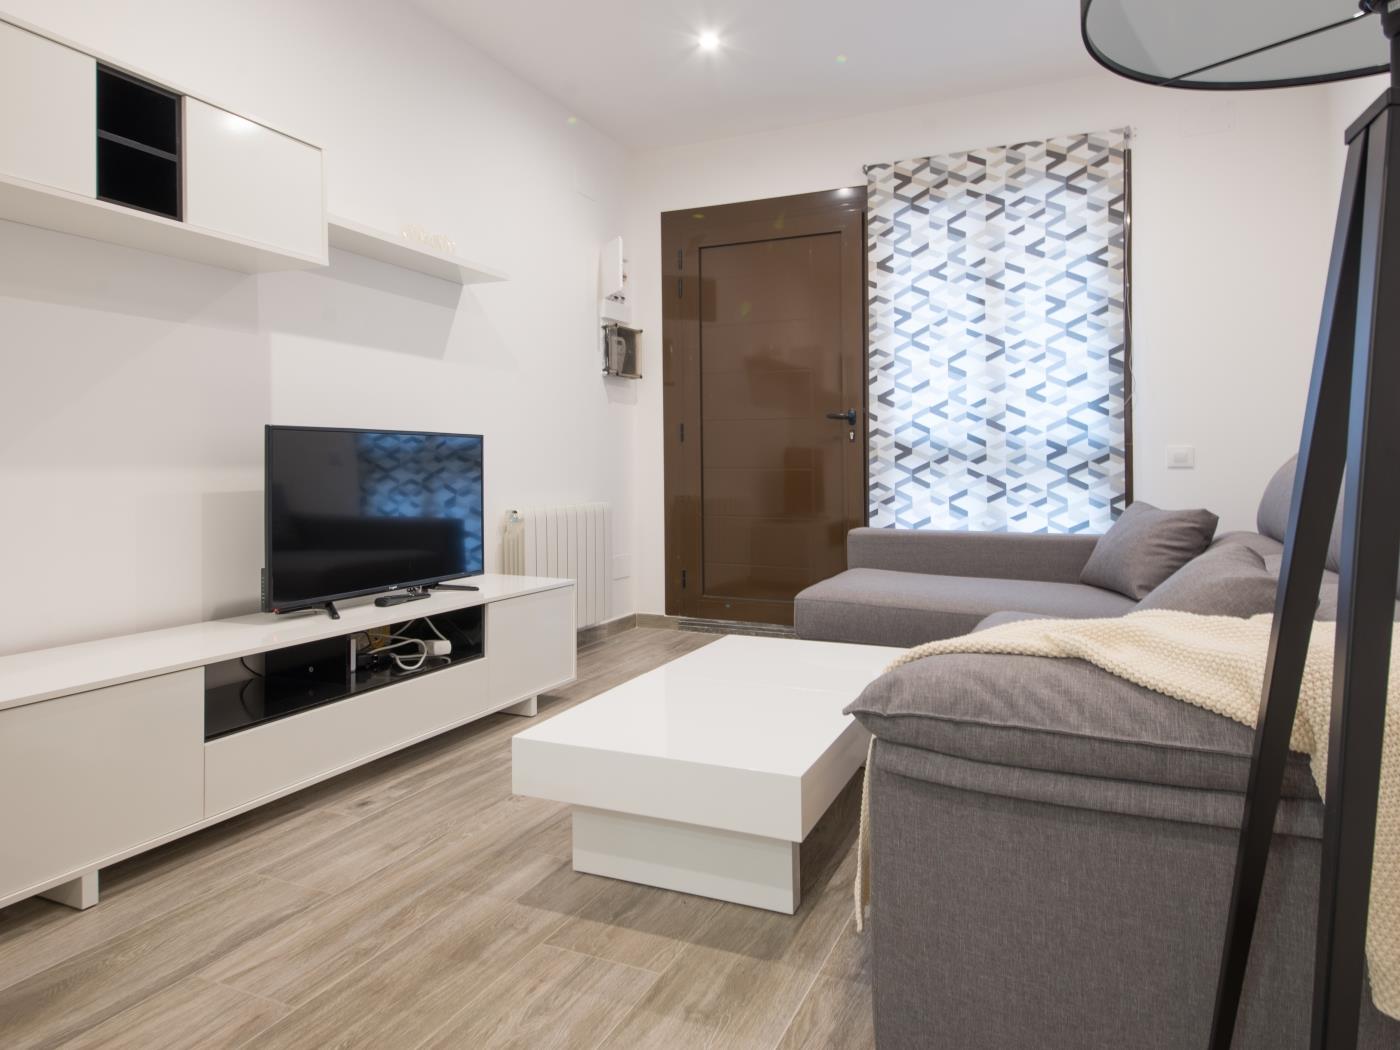 Apartment with private terrace furnished and equipped for monthly rentals - My Space Barcelona Apartments